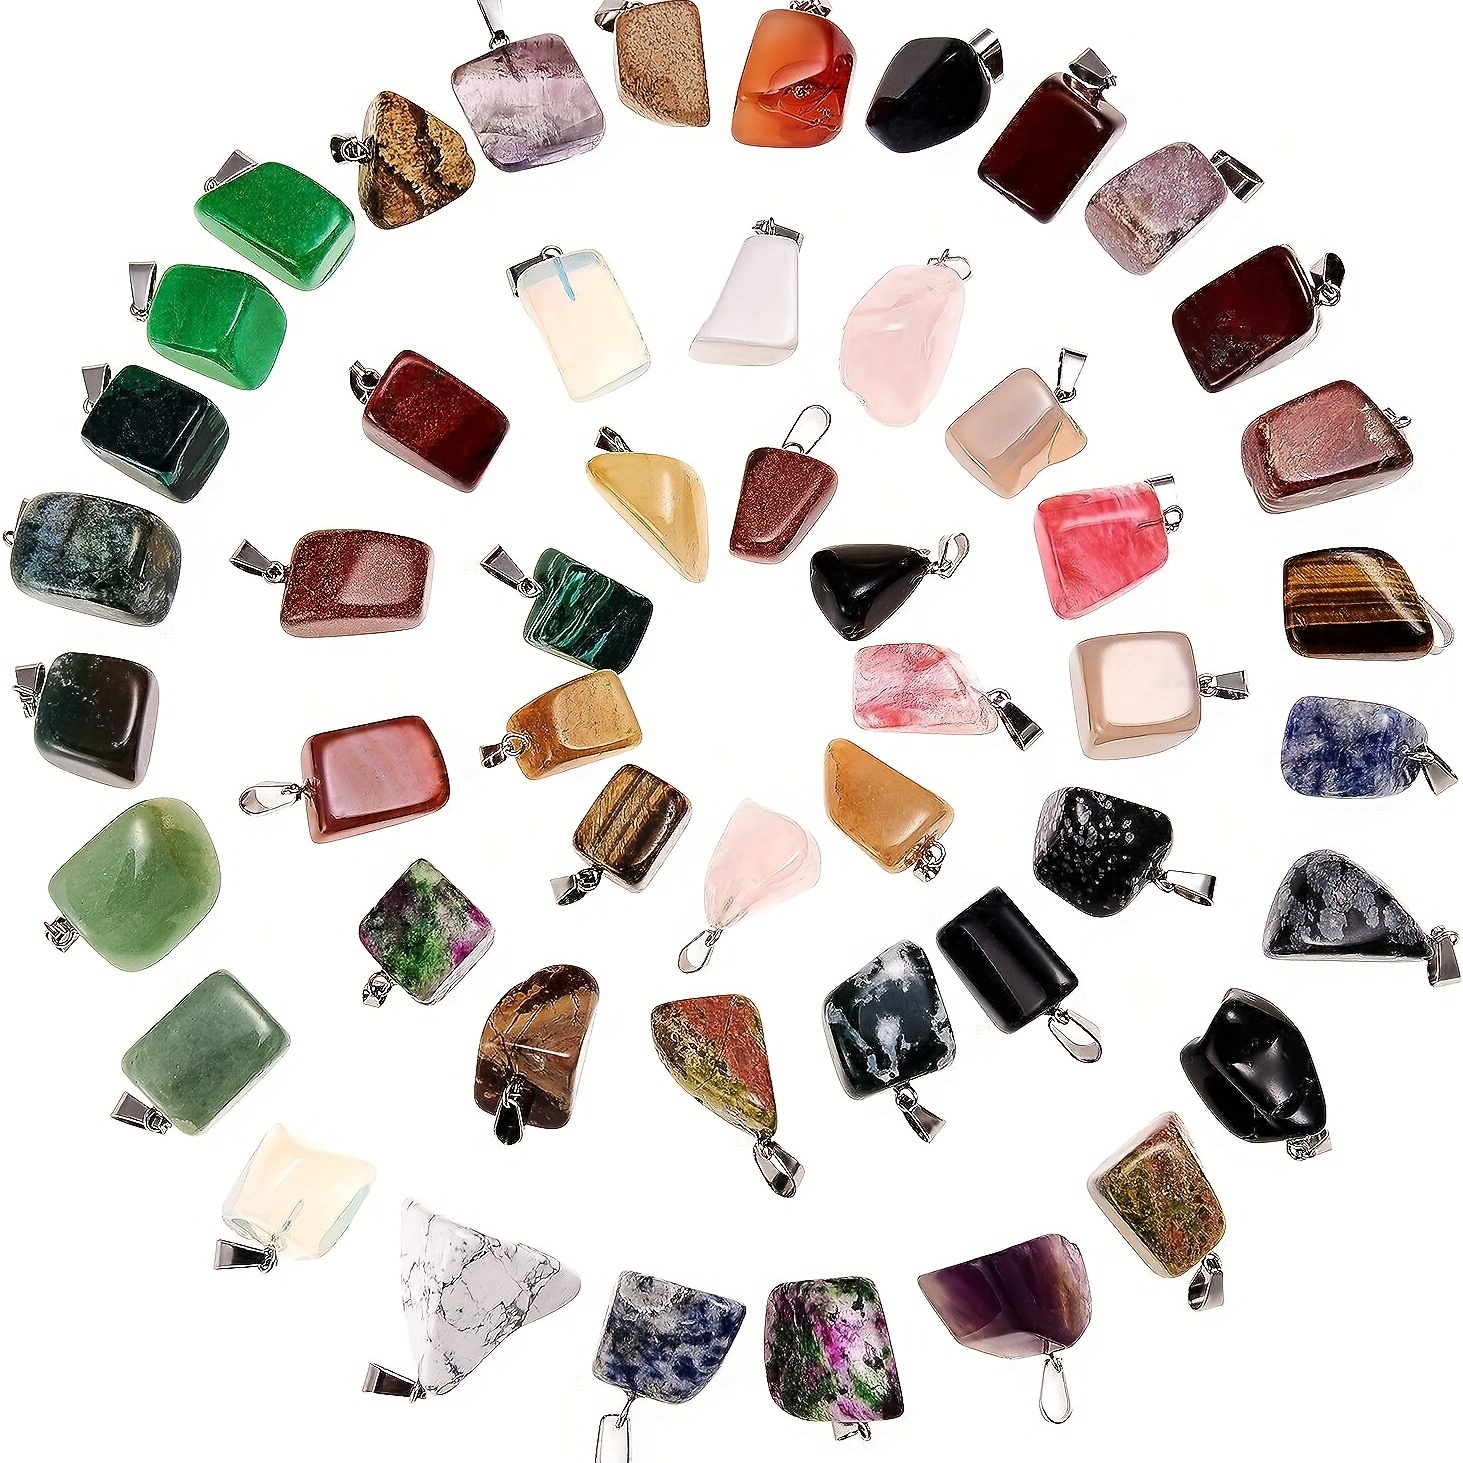 

50pcs Mixed Random 50 Colors Crystal Stone Beads Pendants Quartz Charms With Storage Bag For Elegant Upscale Necklace Bracelet Earrings Keychain Jewelry Making